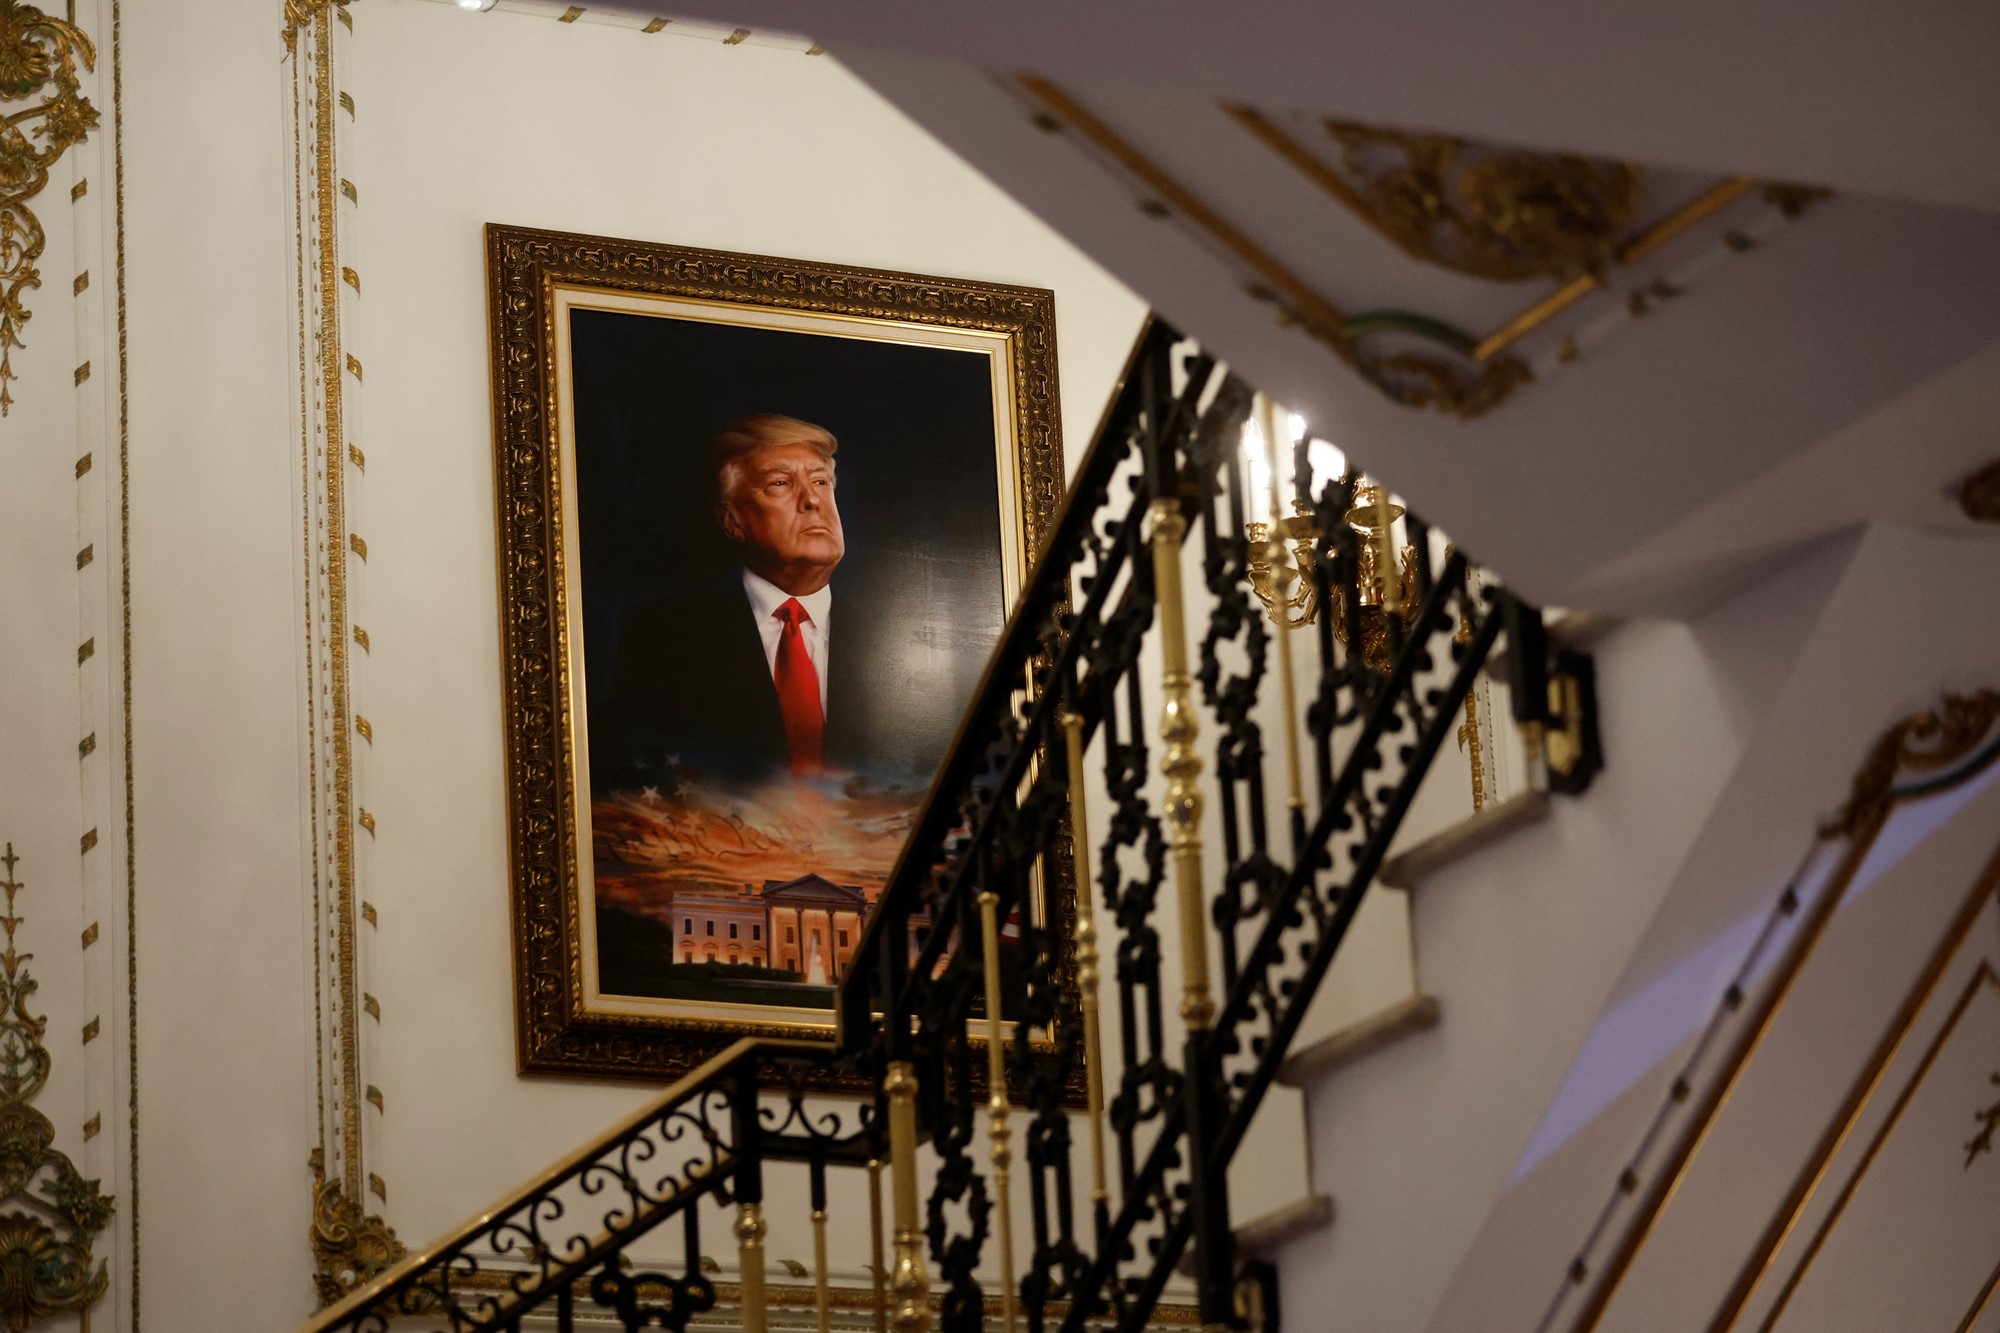 A portrait of Trump hangs on the wall.